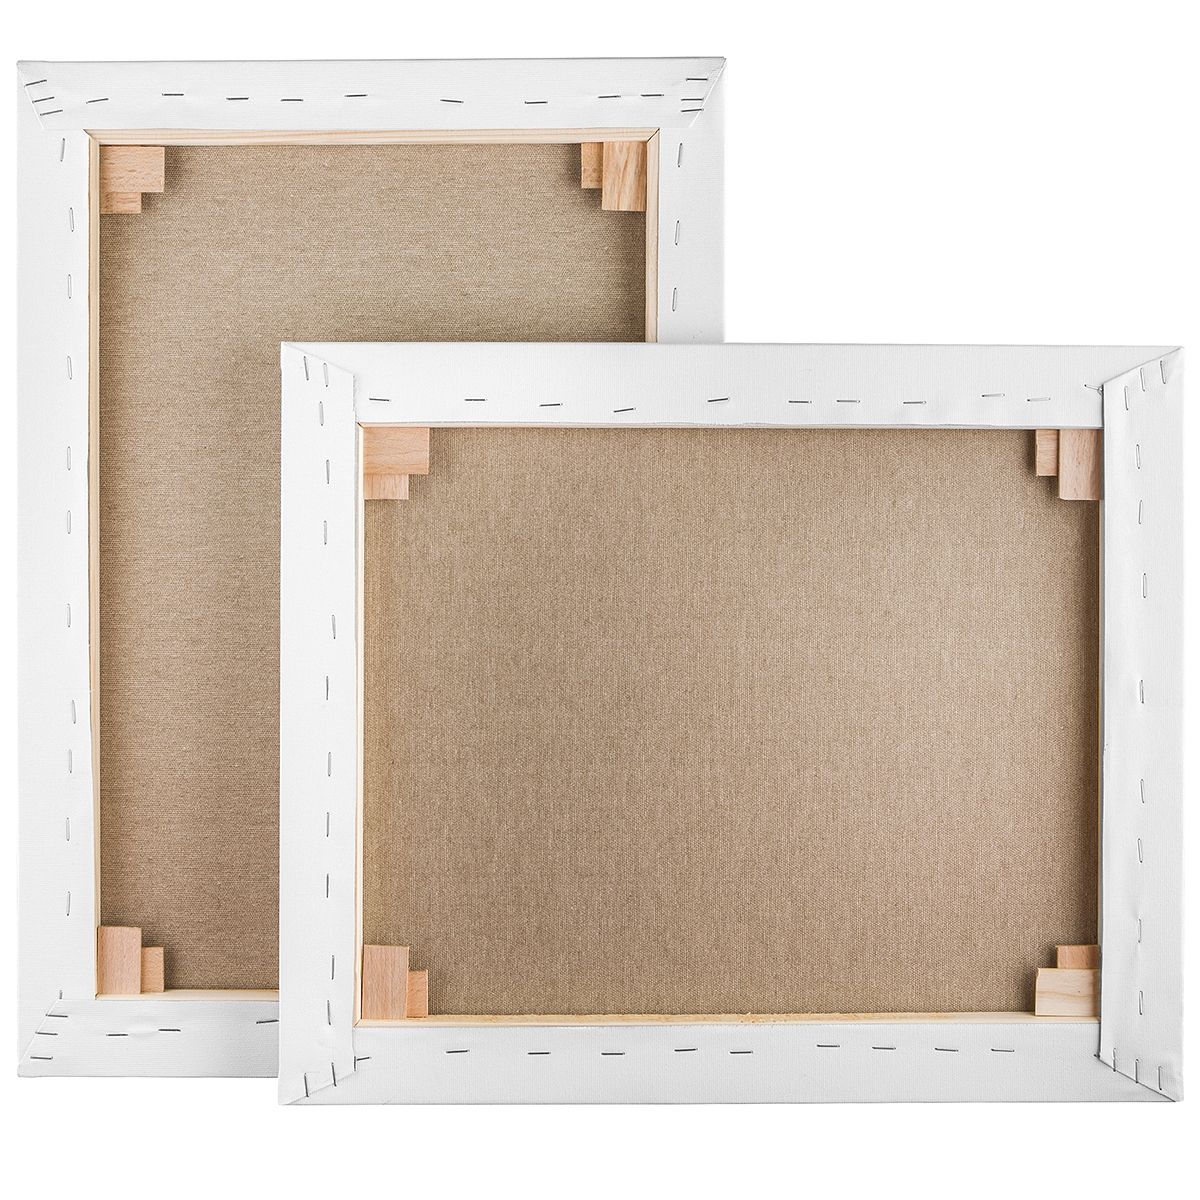 Make 2.5" Thick Canvases! Super-heavy duty stretcher bars